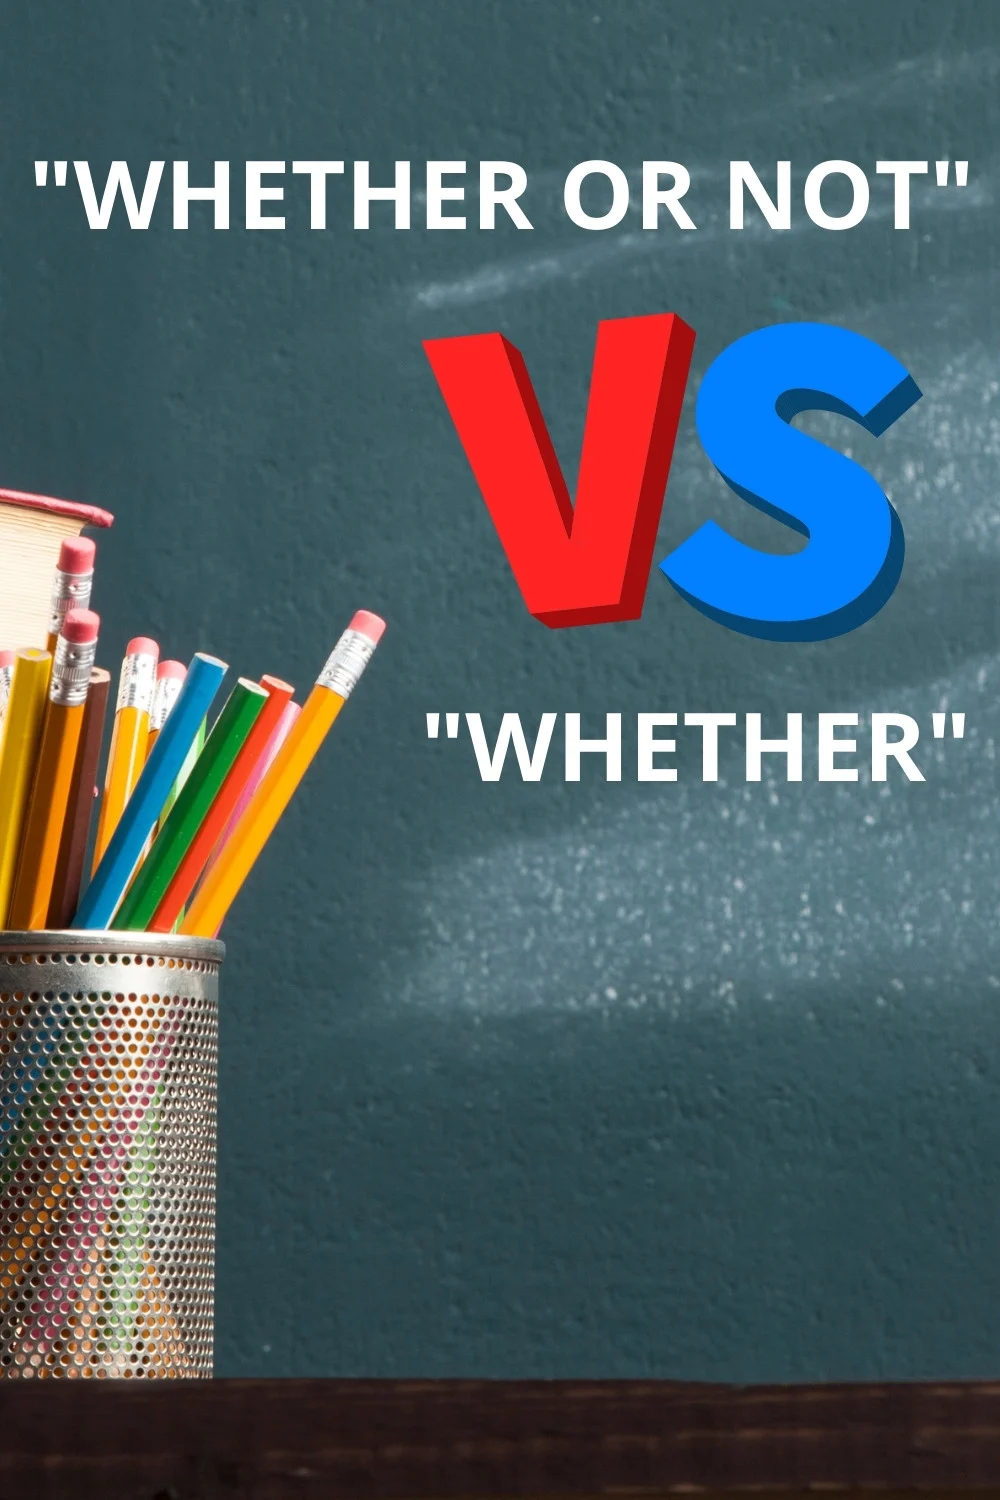 WHETHER OR NOT vs. WHETHER